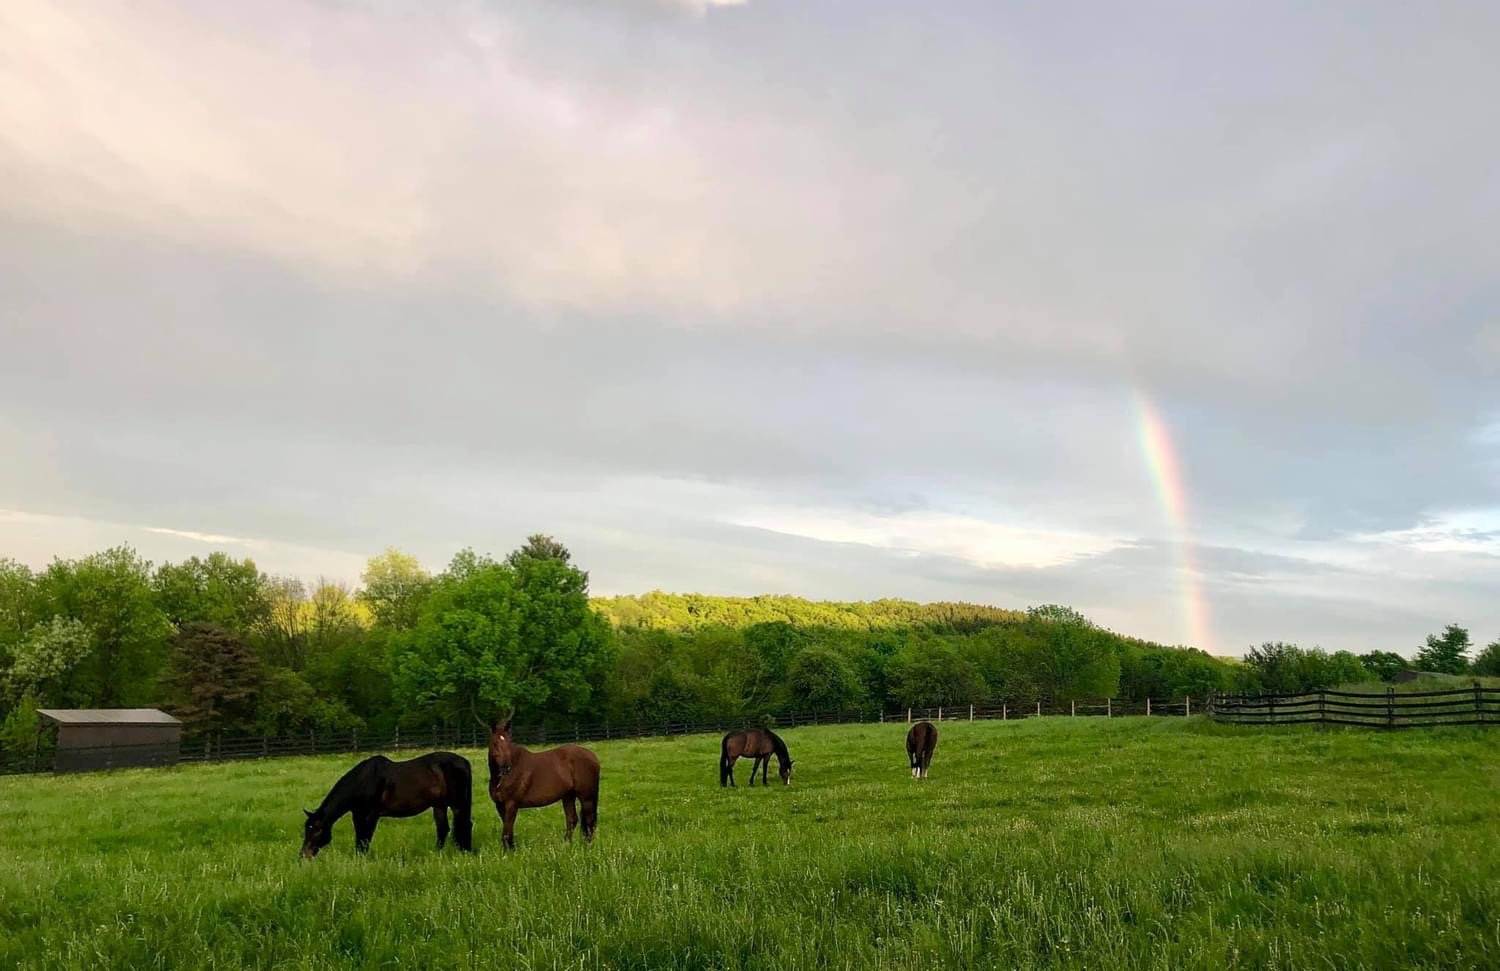  Horses Grazing in Pasture with Rainbow Overhead 